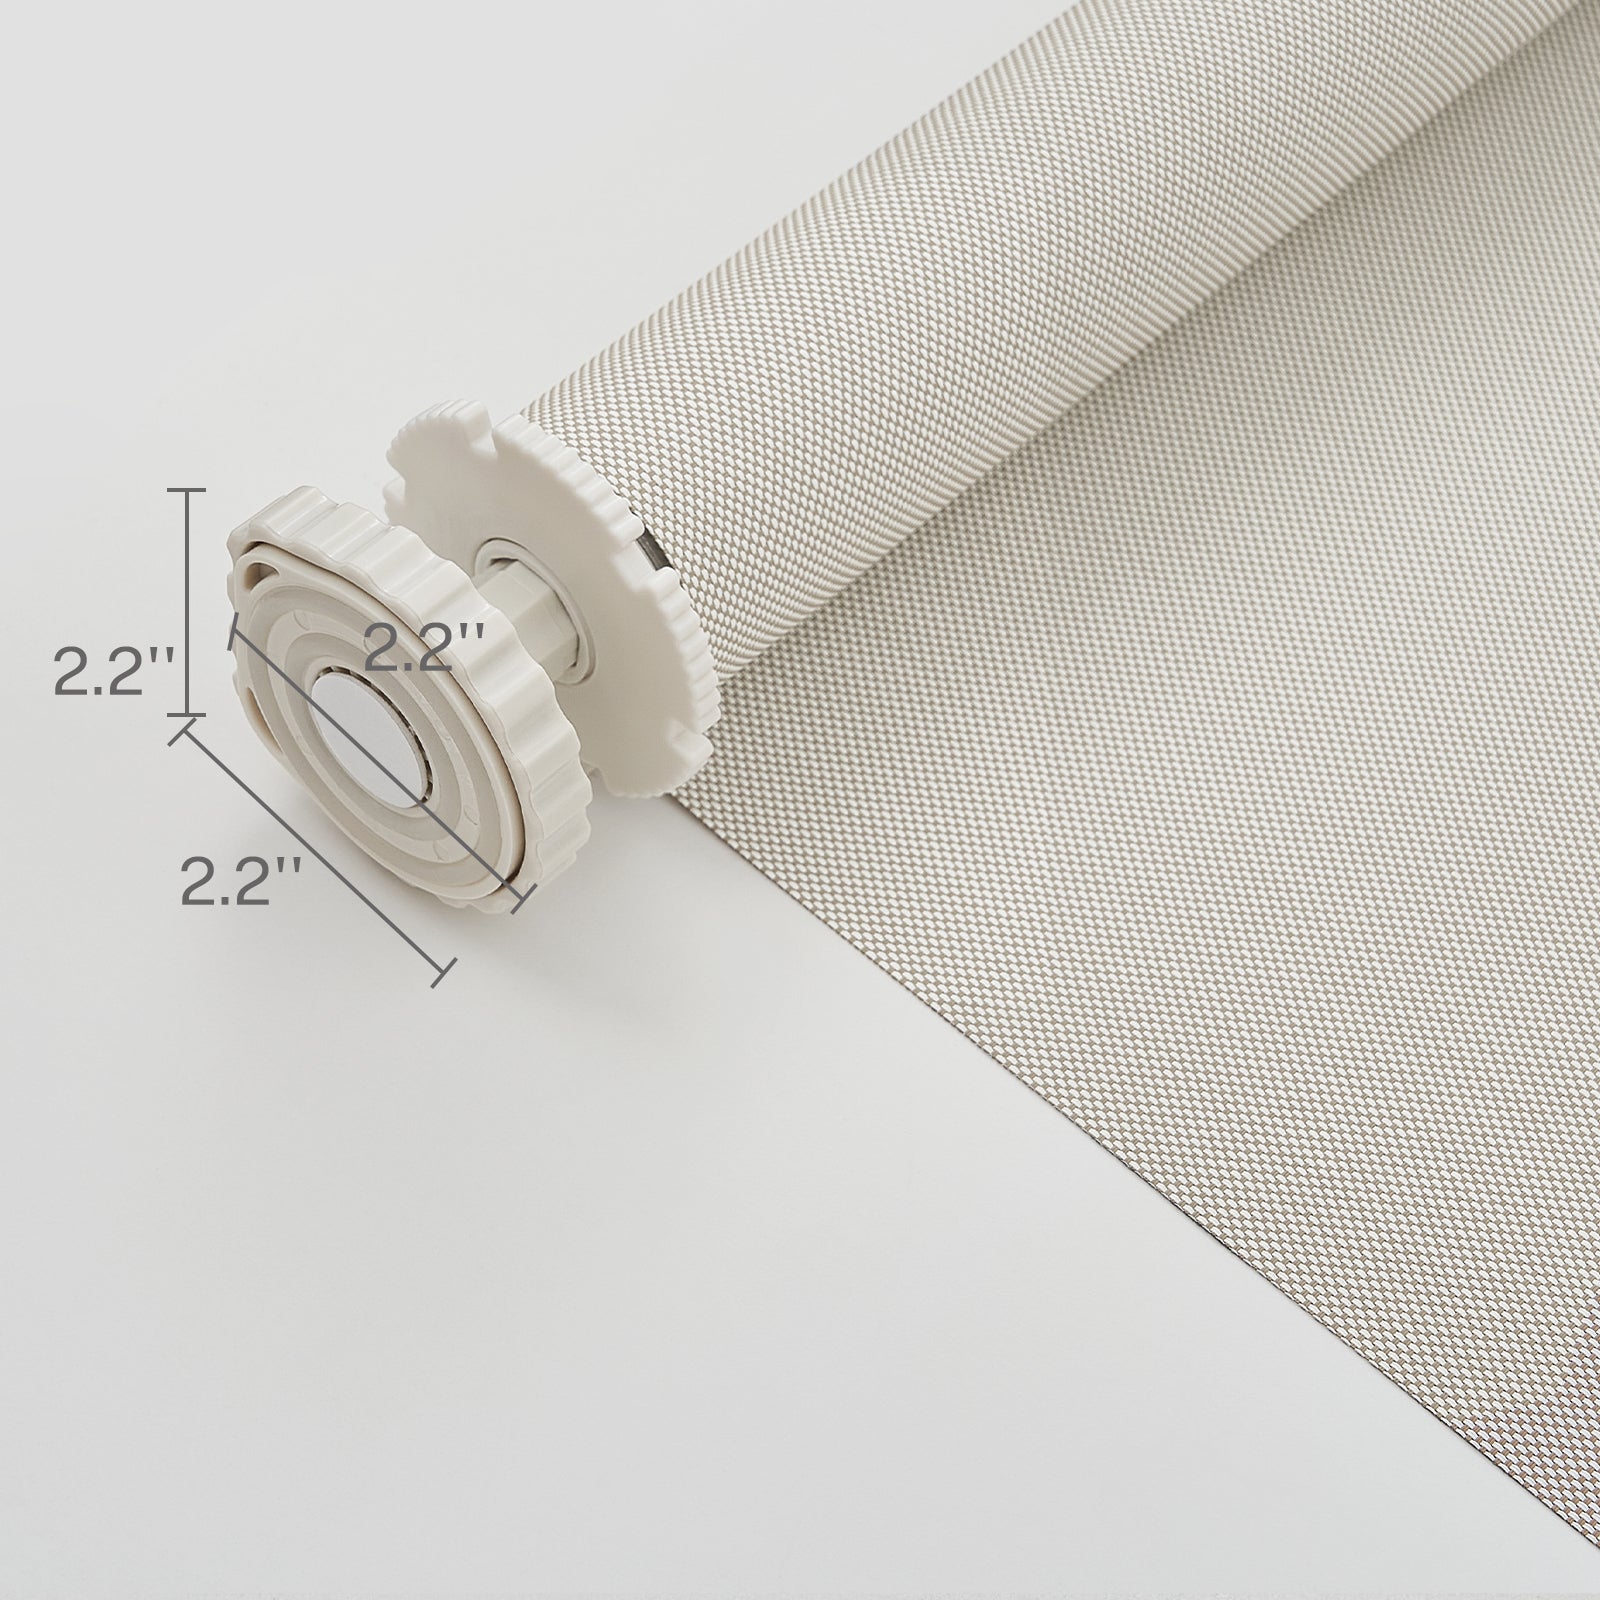 Premier No Drill Roller Shades Corded with Metal Valance